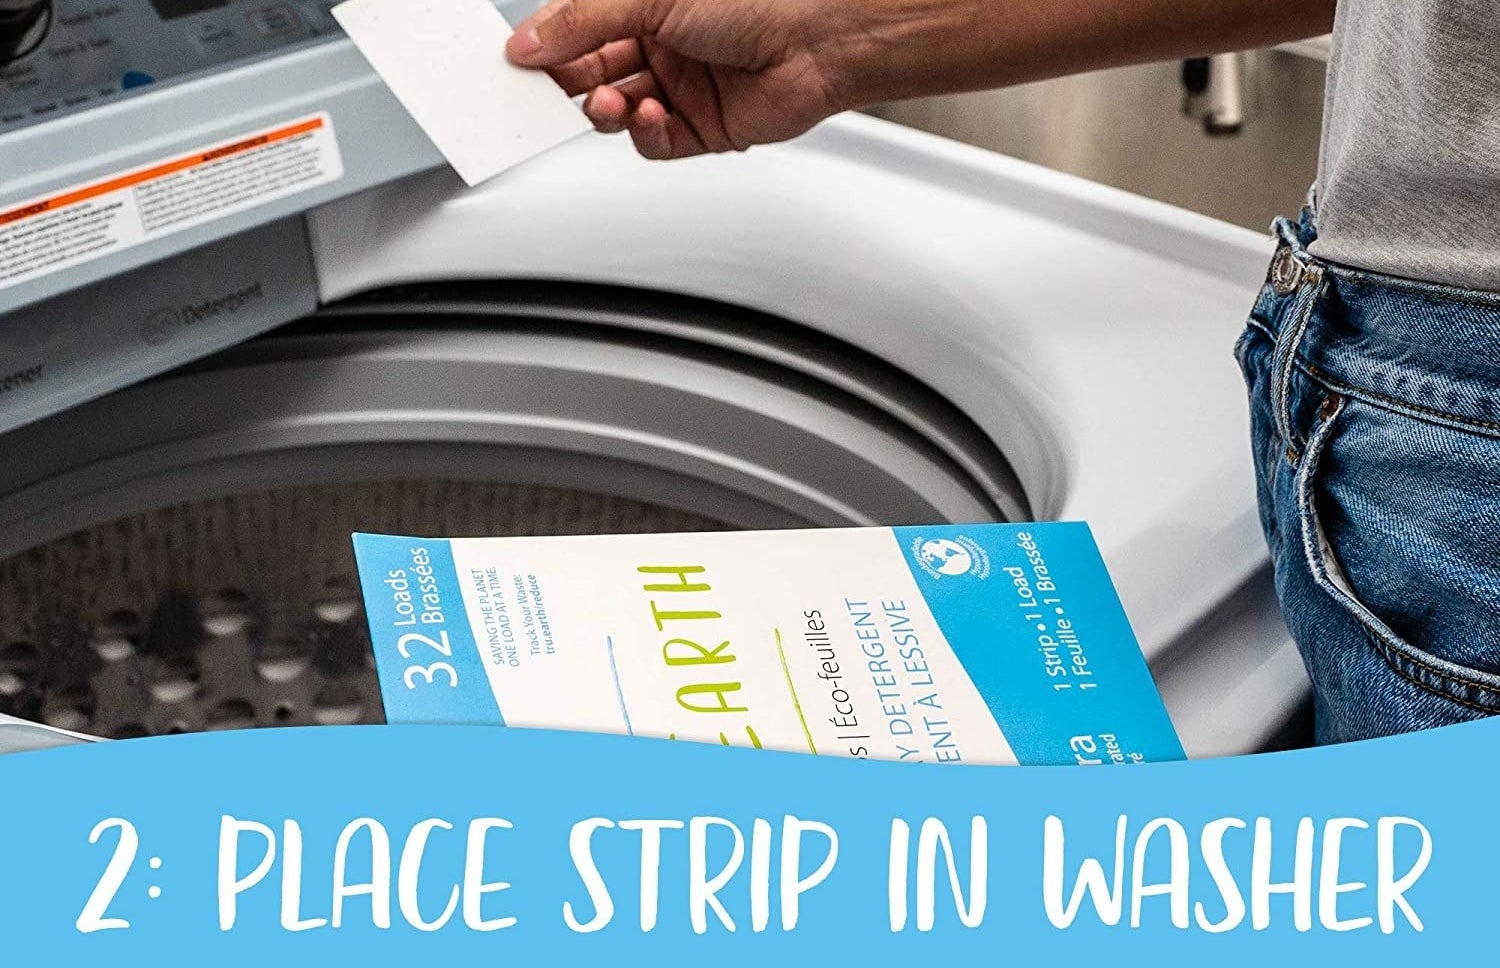 person placing a strip into the washing machine